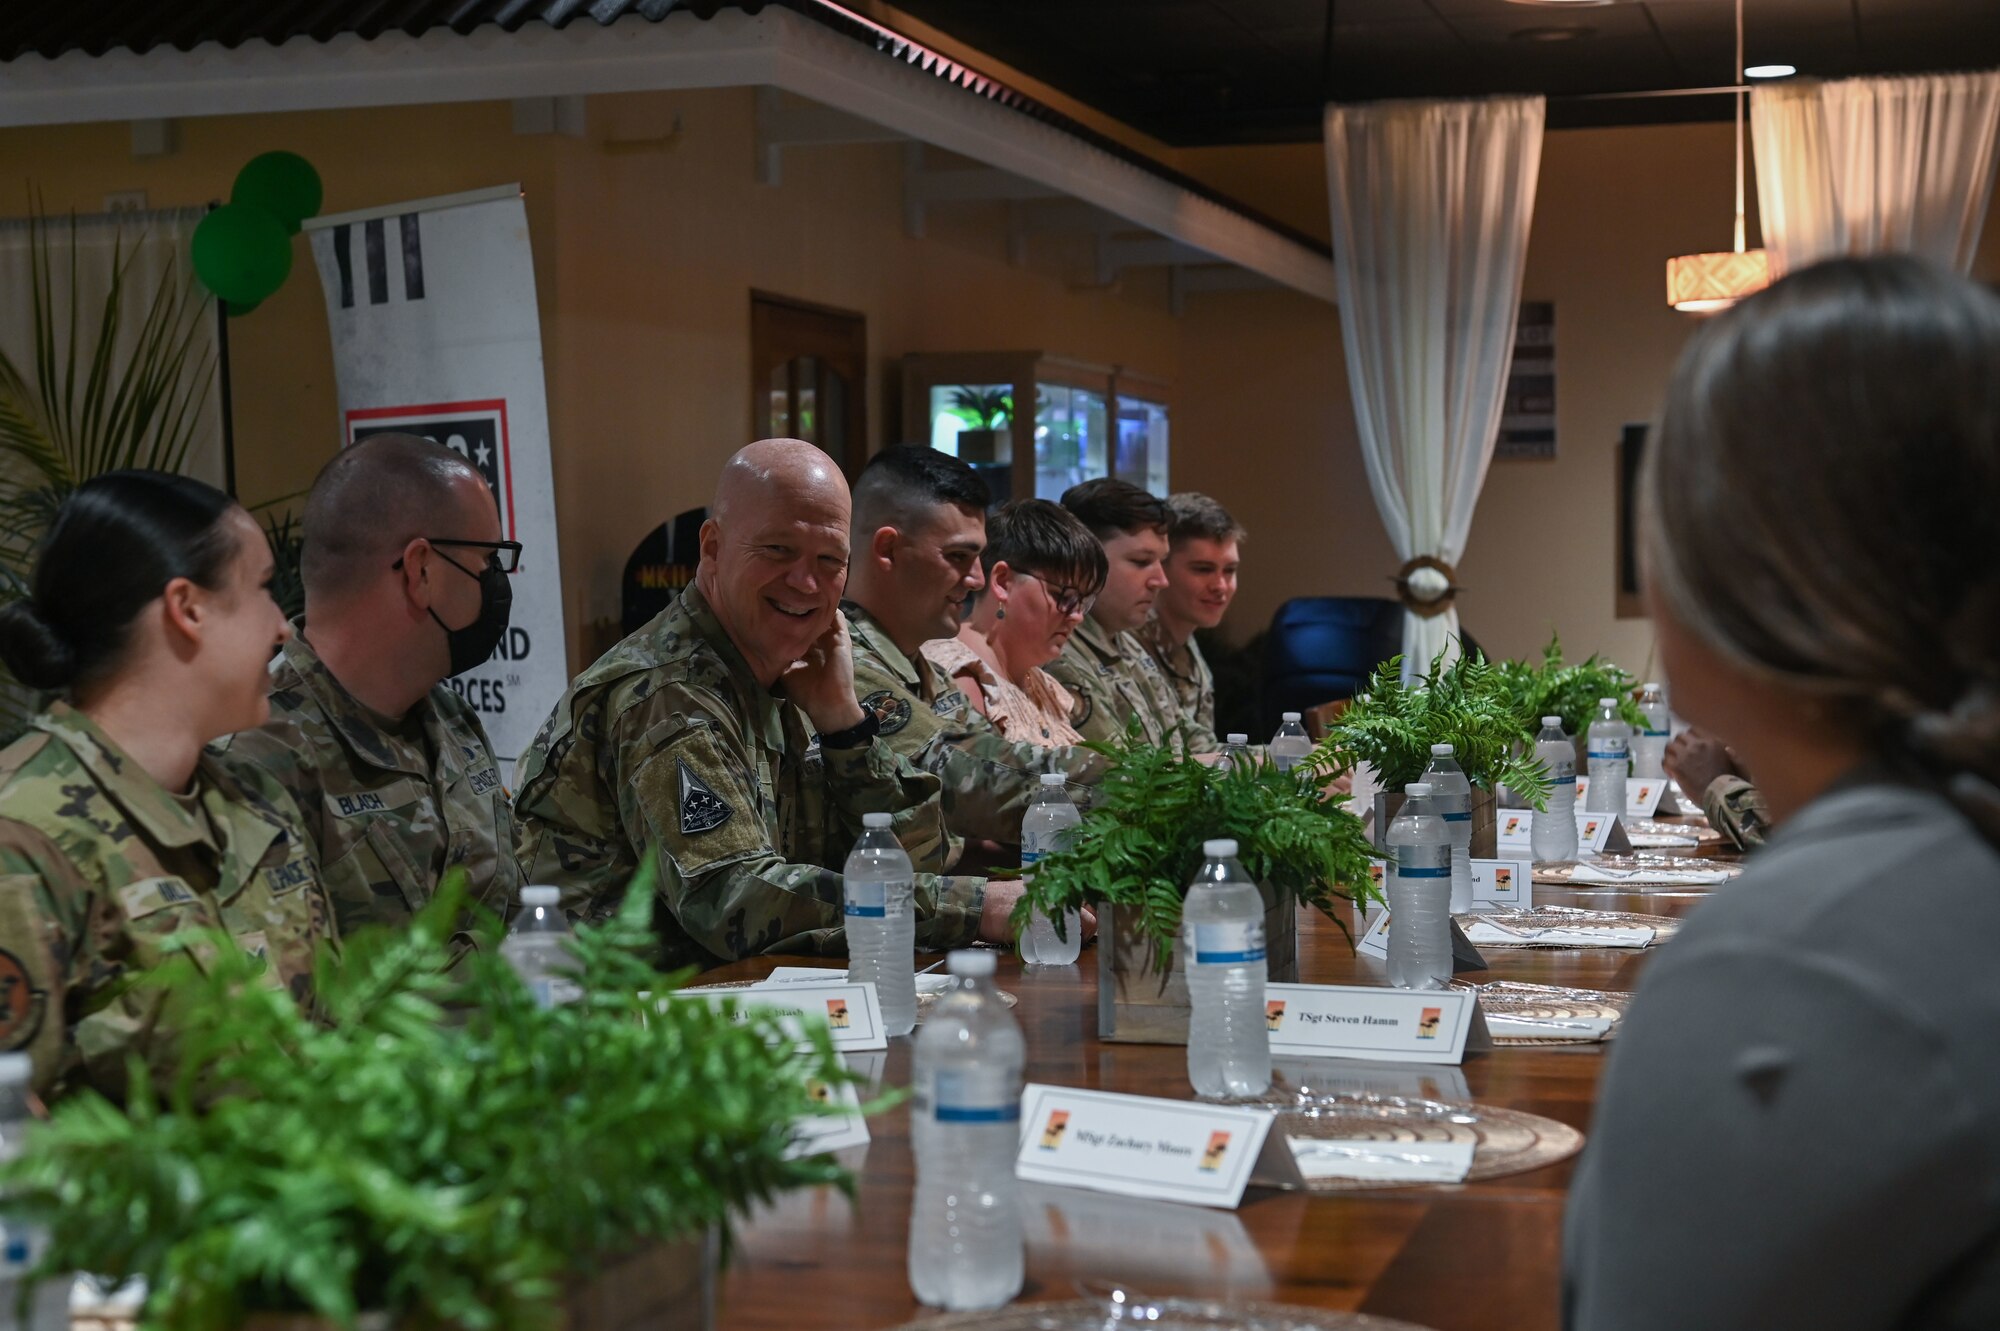 U.S. Space Force Gen. John W. “Jay” Raymond, Chief of Space Operations, meets with 12 Guardians who are assigned to Andersen Air Force Base, Guam, during a tour March 26, 2022. These Guardians transferred from the Air Force to the Space Force over the last 18 months and are awaiting future permanent change of station assignments to USSF units. (U.S. Air Force photo by Staff Sgt. Aubree Owens)